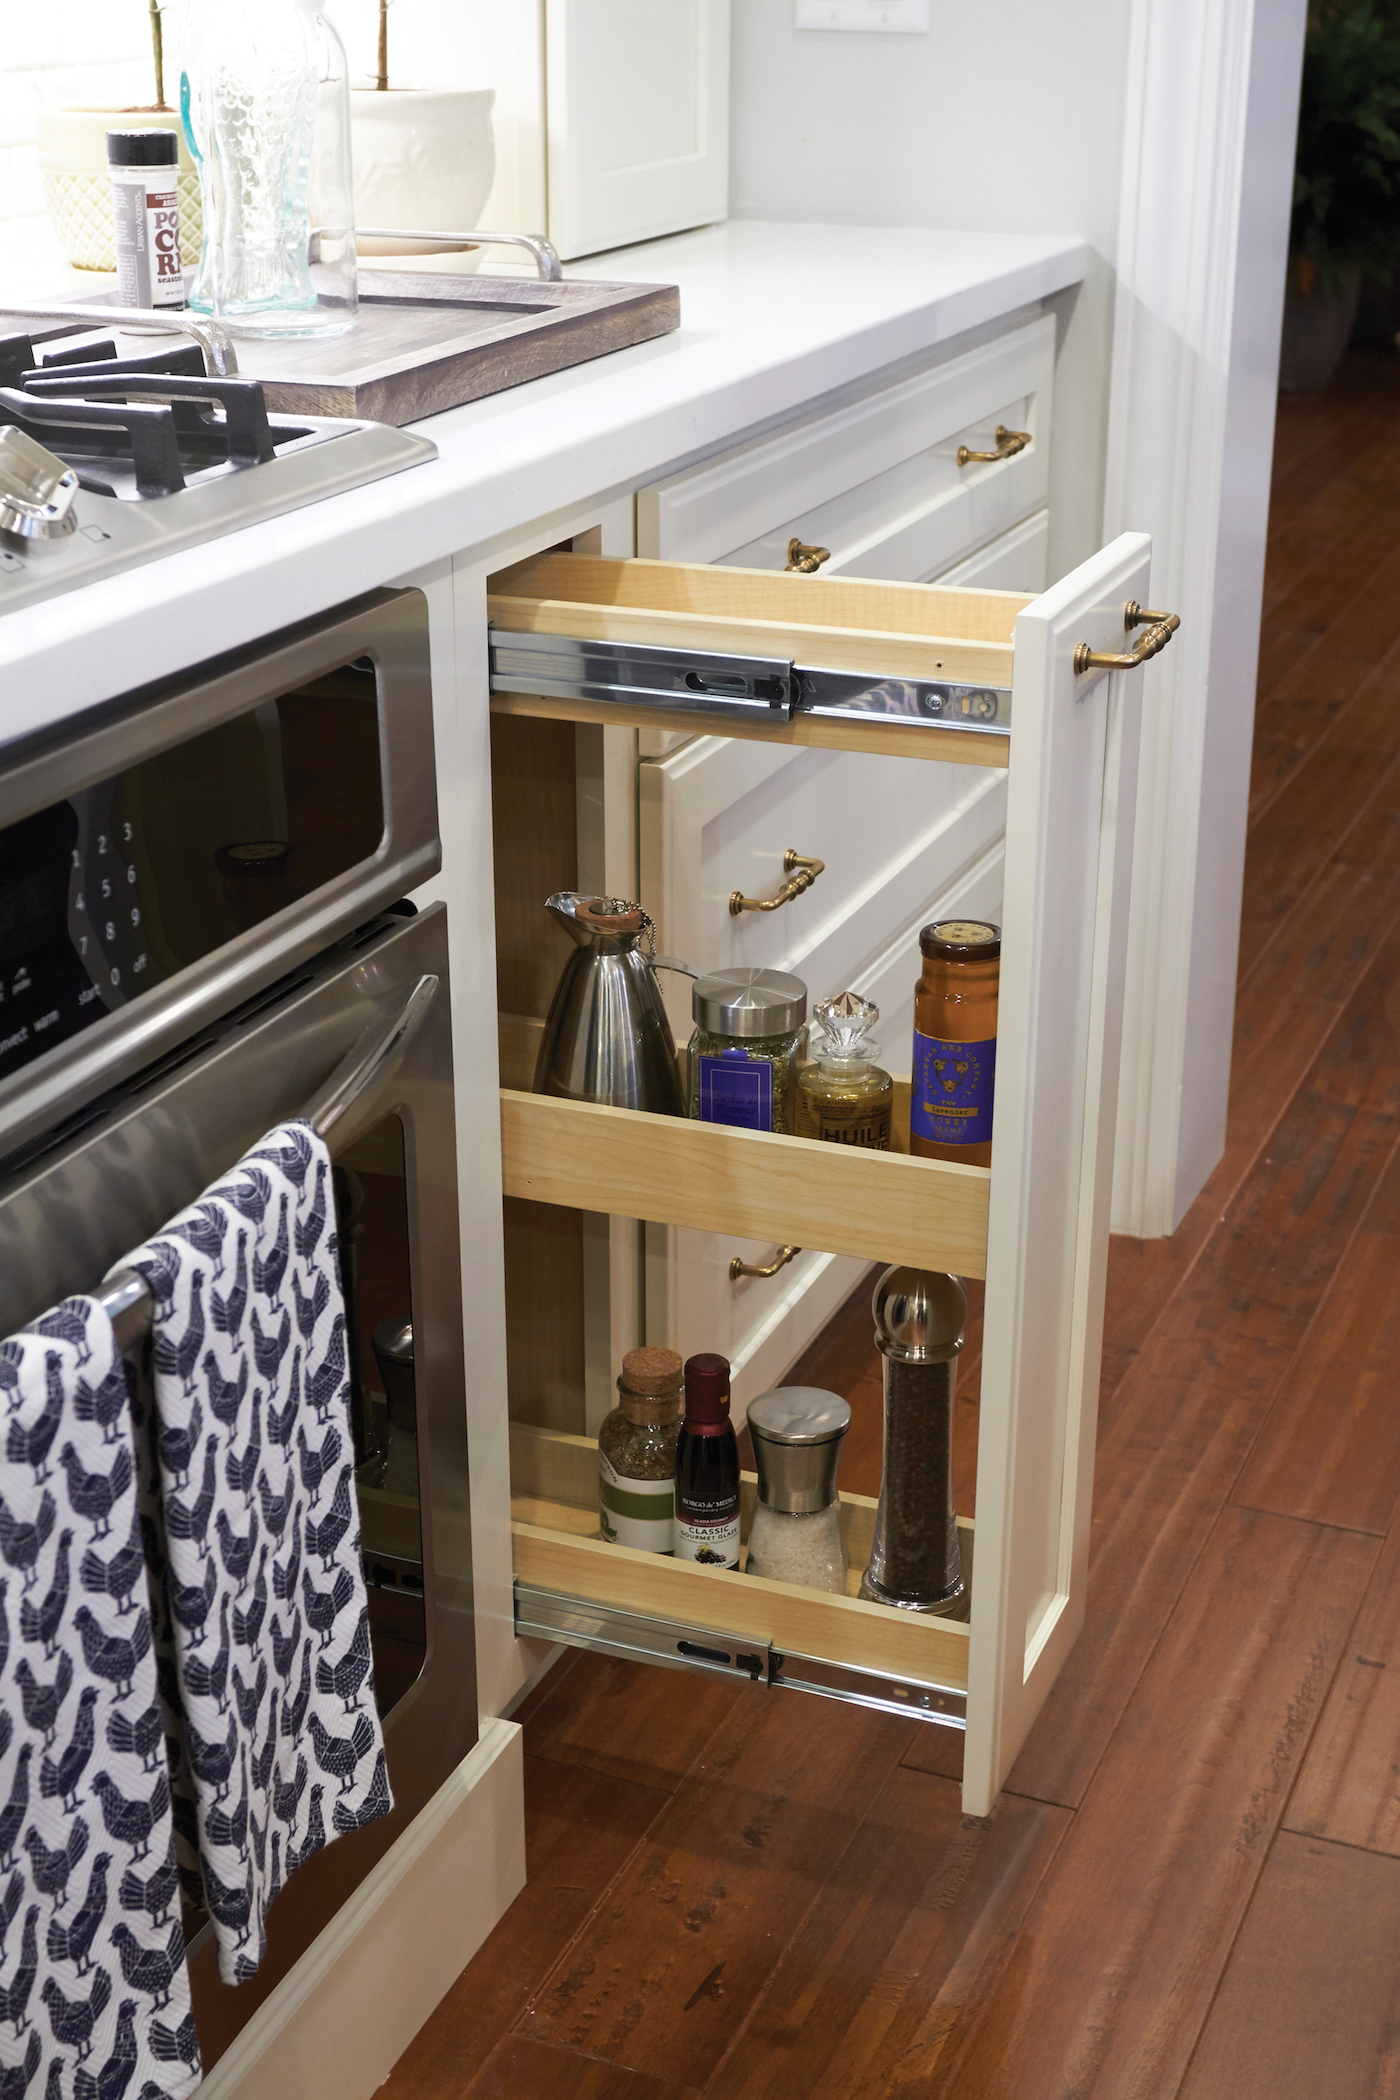 https://crystalcabinets.com/wp-content/uploads/2018/05/Crystalcabinets_Accessories_Kitchen_Pullout_Storage.jpg